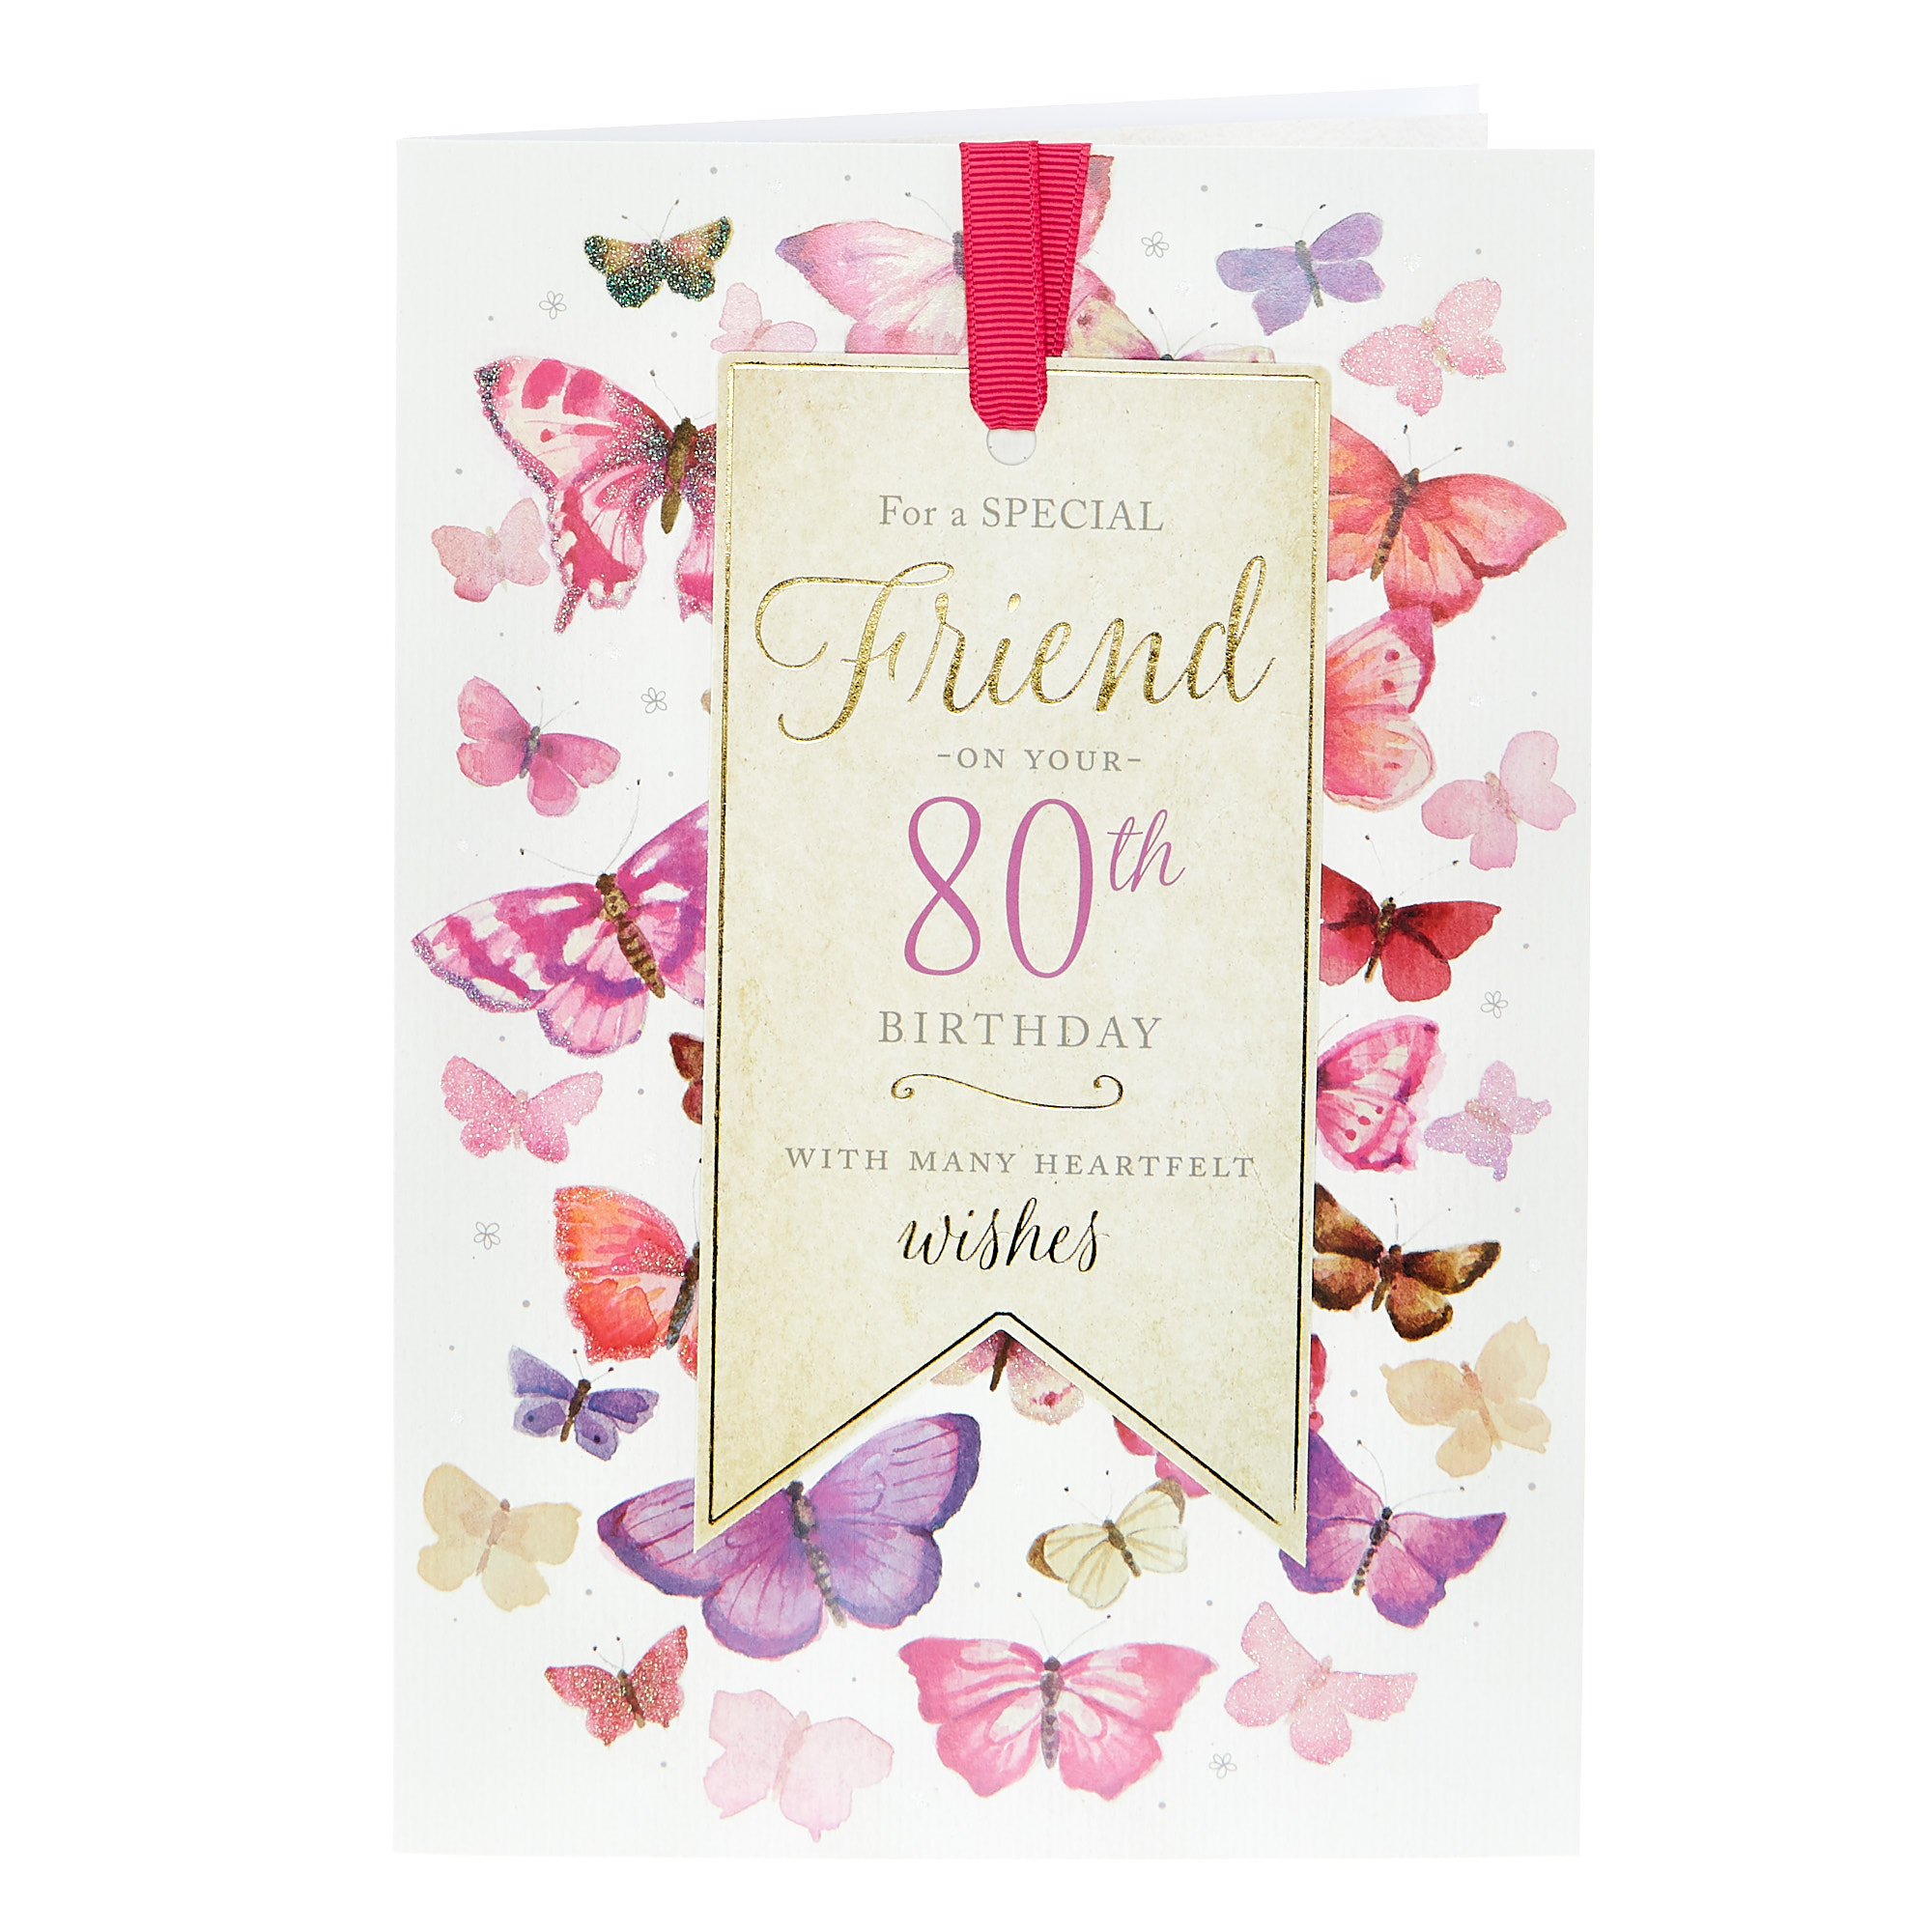 buy-80th-birthday-card-for-a-special-friend-for-gbp-1-29-card